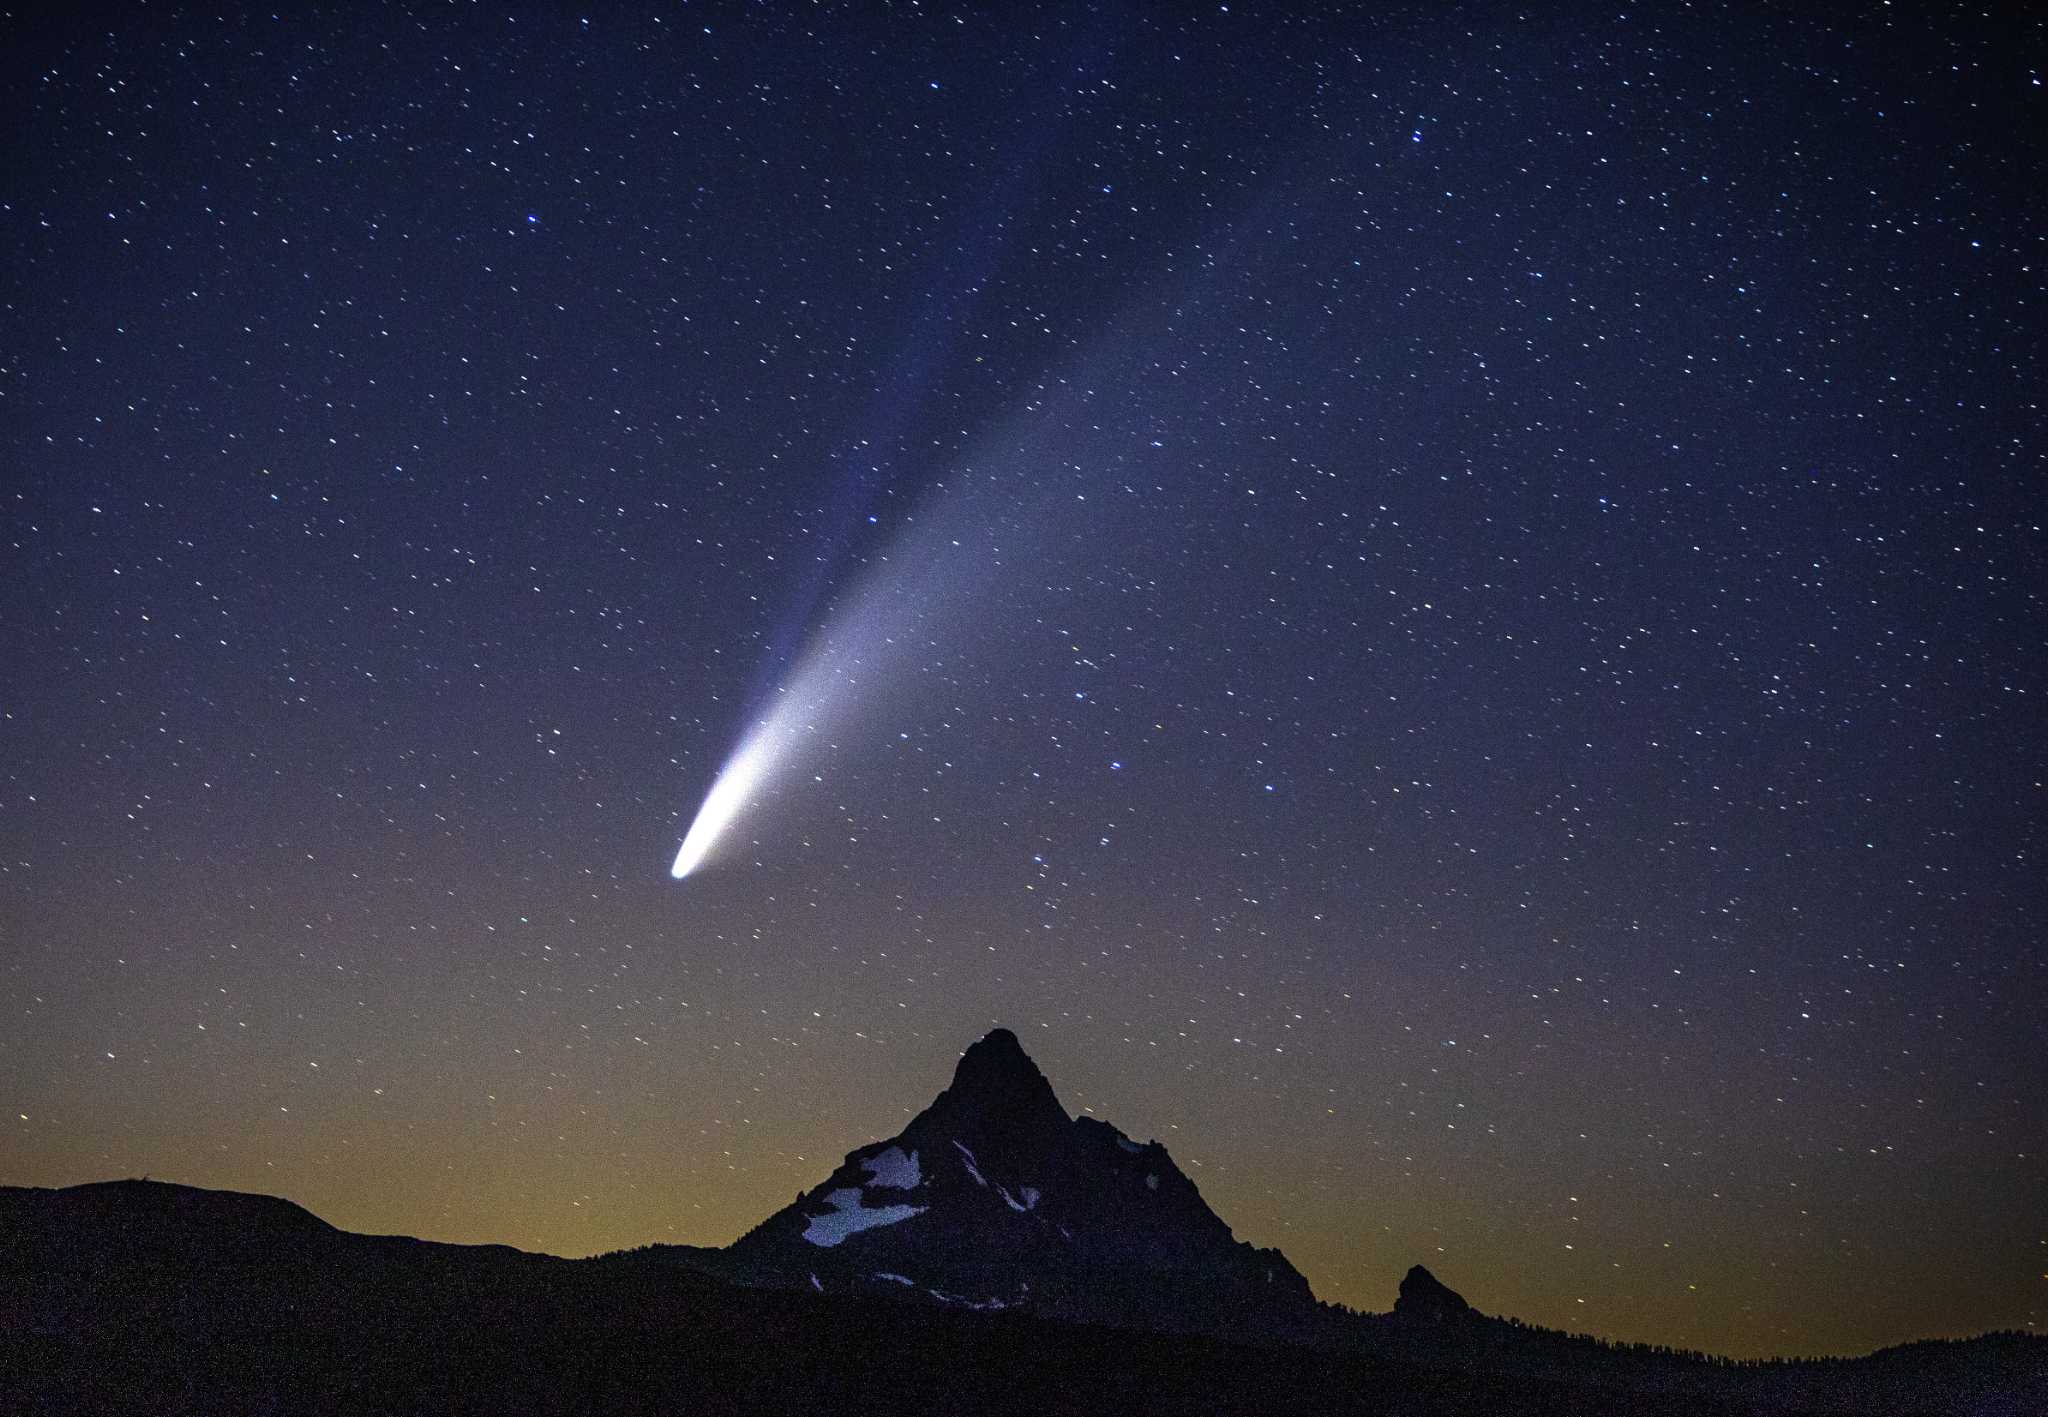 Comet Neowise How To Spot The Spectacular Comet Now Visible With The Naked Eye